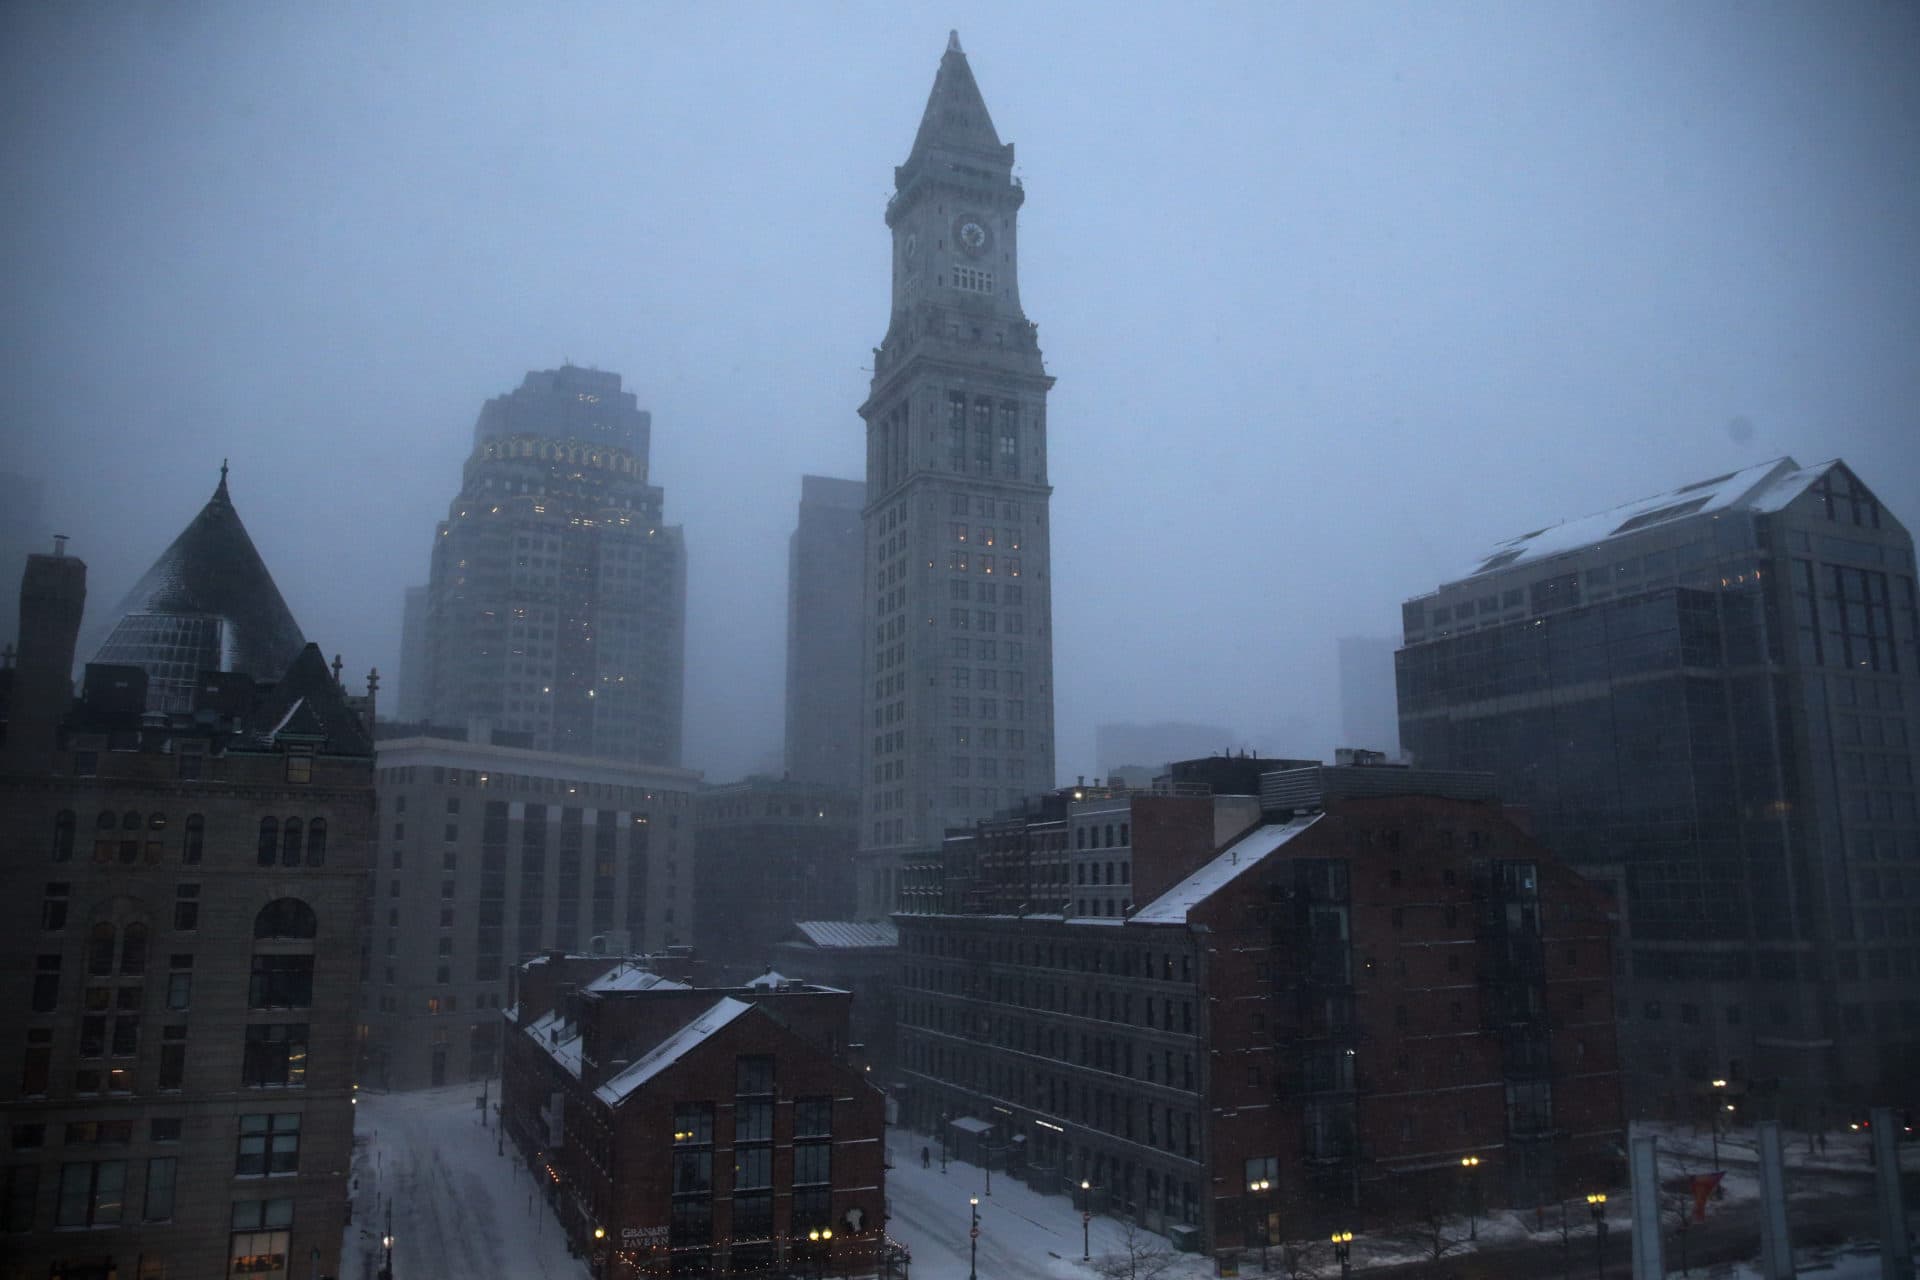 An early morning view during the snowstorm in downtown Boston Saturday. (Craig F. Walker/The Boston Globe via Getty Images)